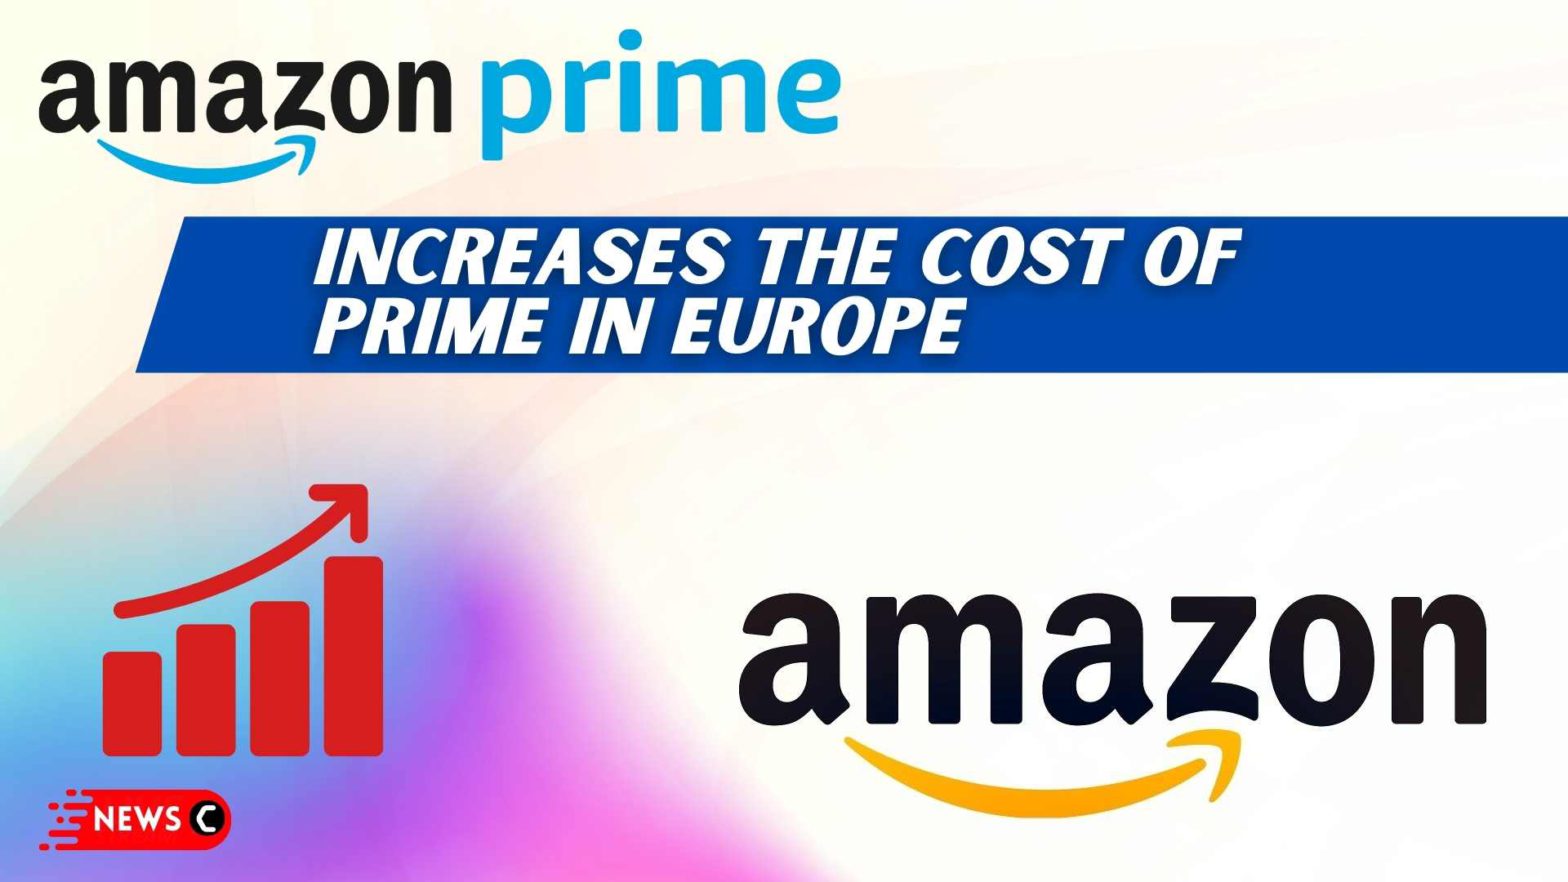 Amazon Blames Inflation as It Increases Cost of Prime in Europe!